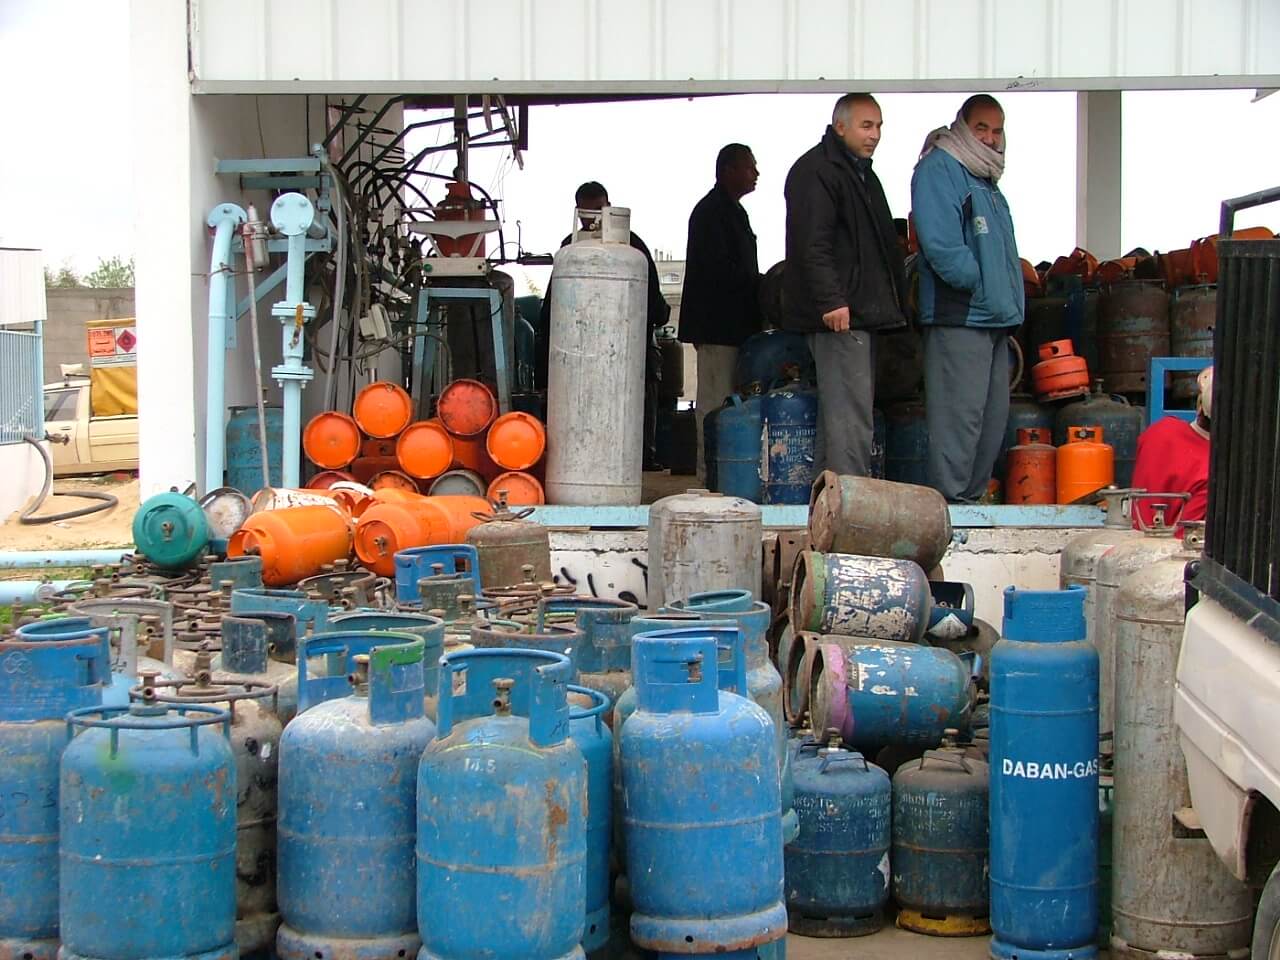 There is also a gas crisis in Gaza. Here people line up to receive their share of gas. (Photo: Isra Saleh El-Namy)